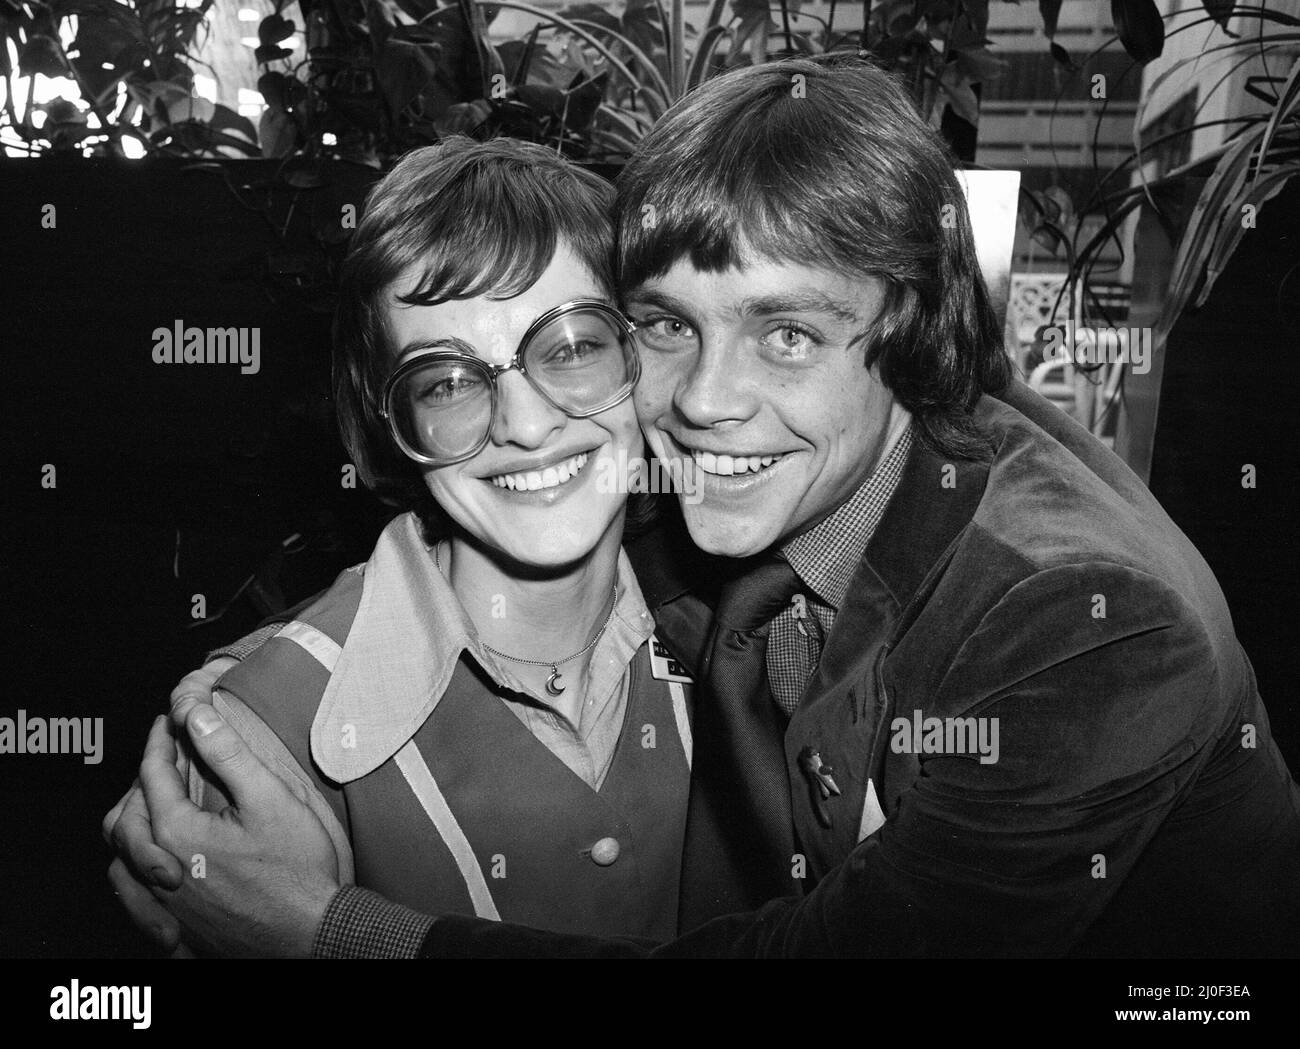 Stars of new film, Star Wars, attend news press conference at the Holiday Inn Hotel in Birmingham, 25th January 1978. Miss J Bridge with Mark Hamill who plays the character Luke Skywalker. Stock Photo